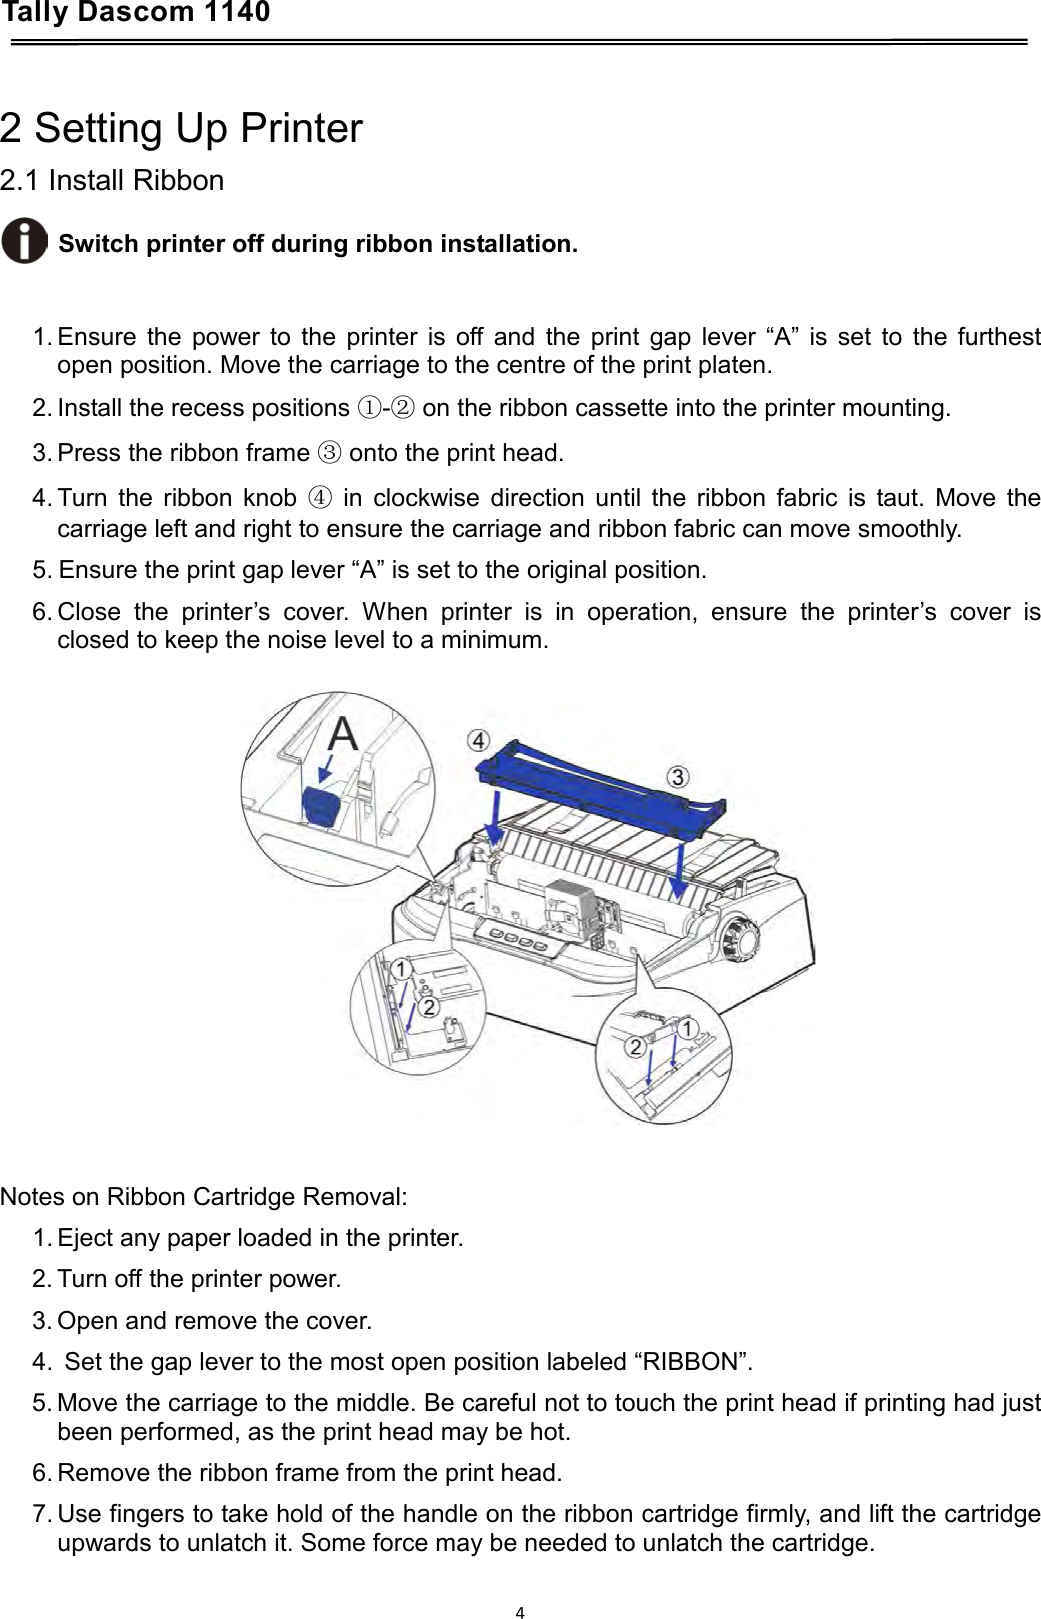 Tally Dascom 1140    2 Setting Up Printer 2.1 Install Ribbon  Switch printer off during ribbon installation.   1. Ensure the power to the printer is off and the print gap lever “A” is set to the furthest open position. Move the carriage to the centre of the print platen. 2. Install the recess positions ①-② on the ribbon cassette into the printer mounting. 3. Press the ribbon frame ③ onto the print head. 4. Turn the ribbon knob ④ in clockwise direction until the ribbon fabric is taut. Move the carriage left and right to ensure the carriage and ribbon fabric can move smoothly. 5. Ensure the print gap lever “A” is set to the original position. 6. Close the printer’s cover. When printer is in operation, ensure the printer’s cover is closed to keep the noise level to a minimum.     Notes on Ribbon Cartridge Removal: 1. Eject any paper loaded in the printer. 2. Turn off the printer power. 3. Open and remove the cover. 4.  Set the gap lever to the most open position labeled “RIBBON”. 5. Move the carriage to the middle. Be careful not to touch the print head if printing had just been performed, as the print head may be hot. 6. Remove the ribbon frame from the print head. 7. Use fingers to take hold of the handle on the ribbon cartridge firmly, and lift the cartridge upwards to unlatch it. Some force may be needed to unlatch the cartridge. 4  